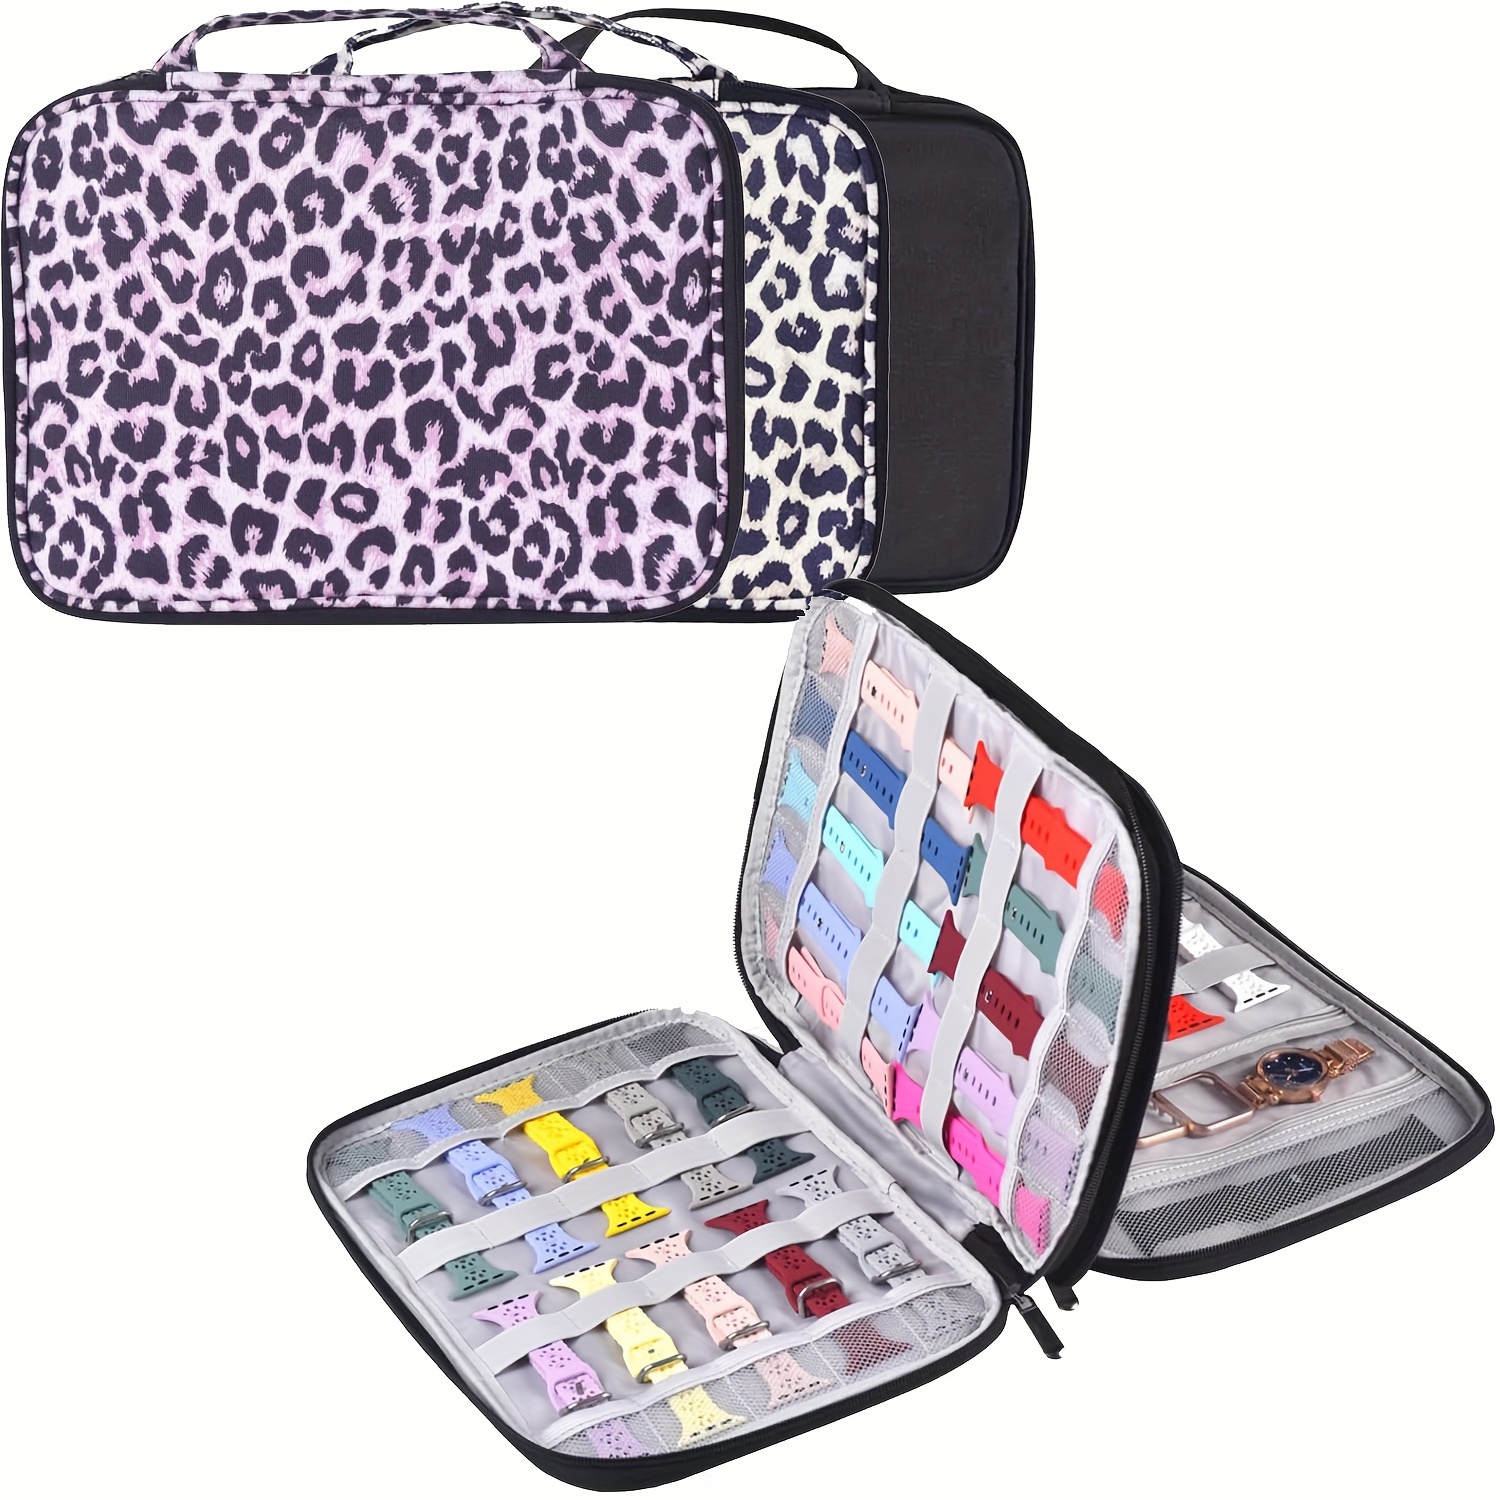 

Expandable Watch Band Organizer Case - Holds 35 Straps, Durable Polyester & Oxford Fabric, Leopard Print Design, Ideal For Watch Bands & Accessories Watch Accessories